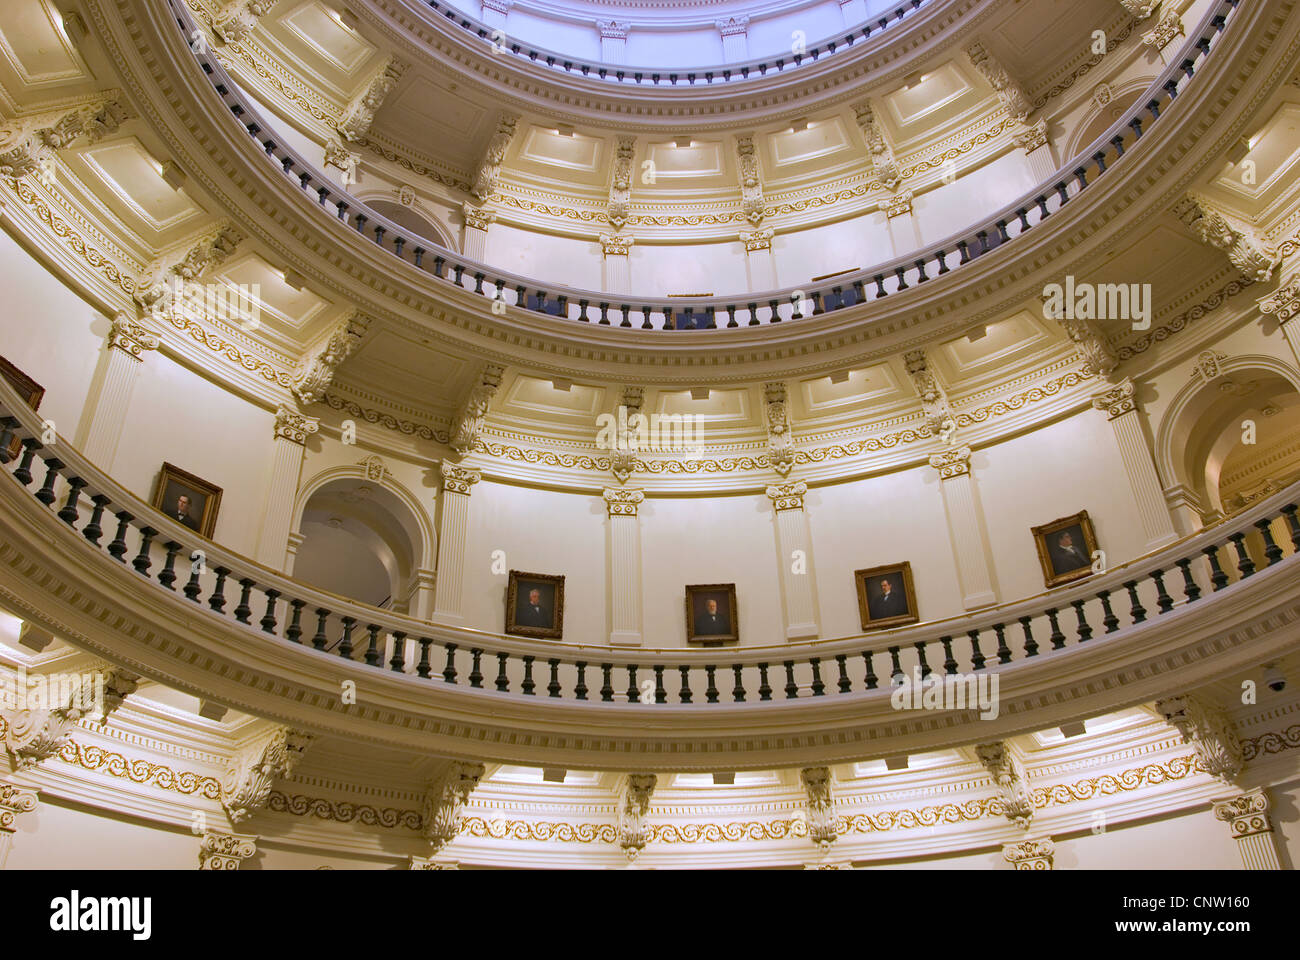 The Texas State Capitol rotunda features portraits of the state's past governors. Stock Photo